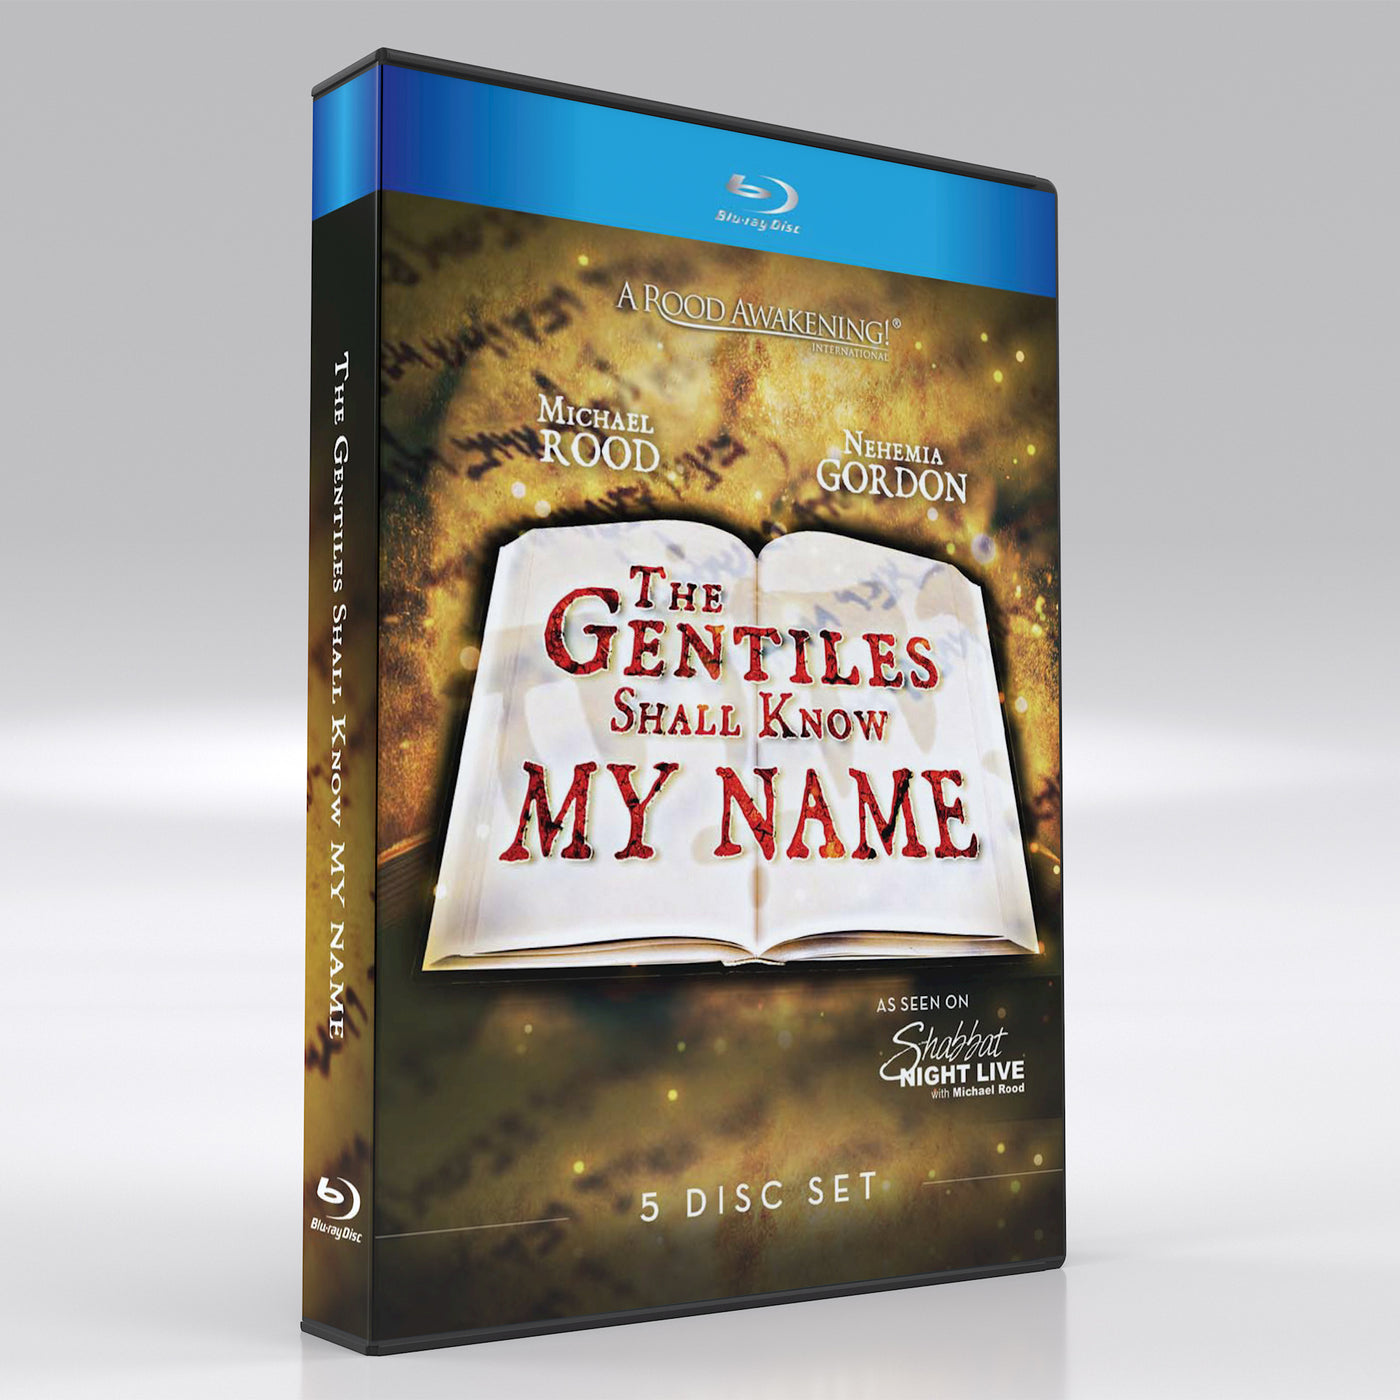 The Gentiles Shall Know My Name with Michael Rood and Nehemia Gordon